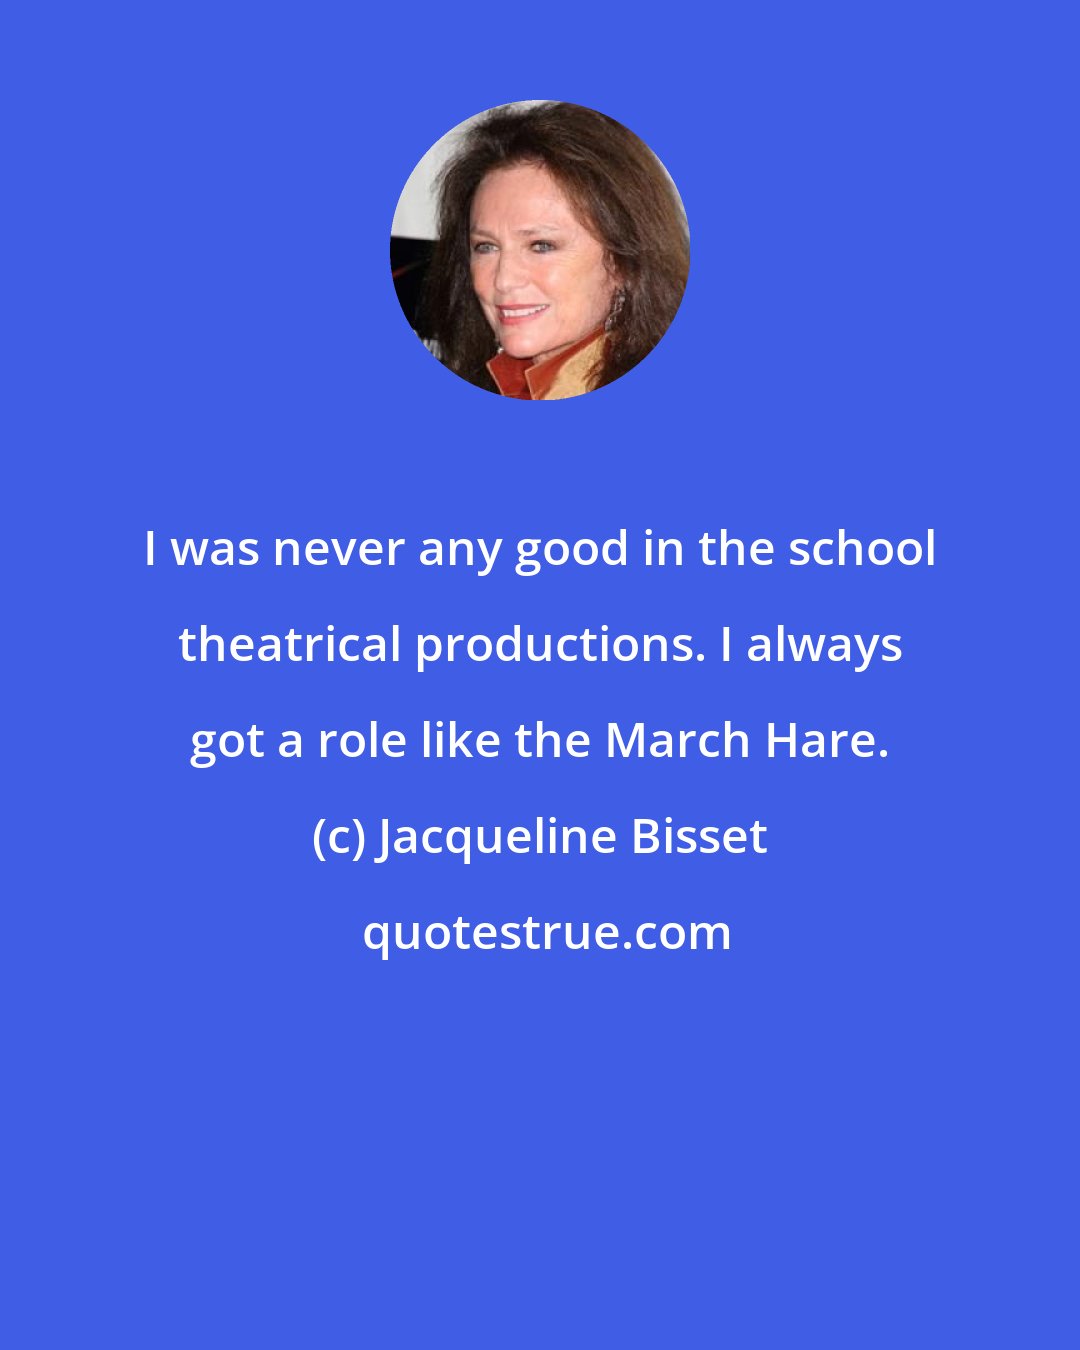 Jacqueline Bisset: I was never any good in the school theatrical productions. I always got a role like the March Hare.